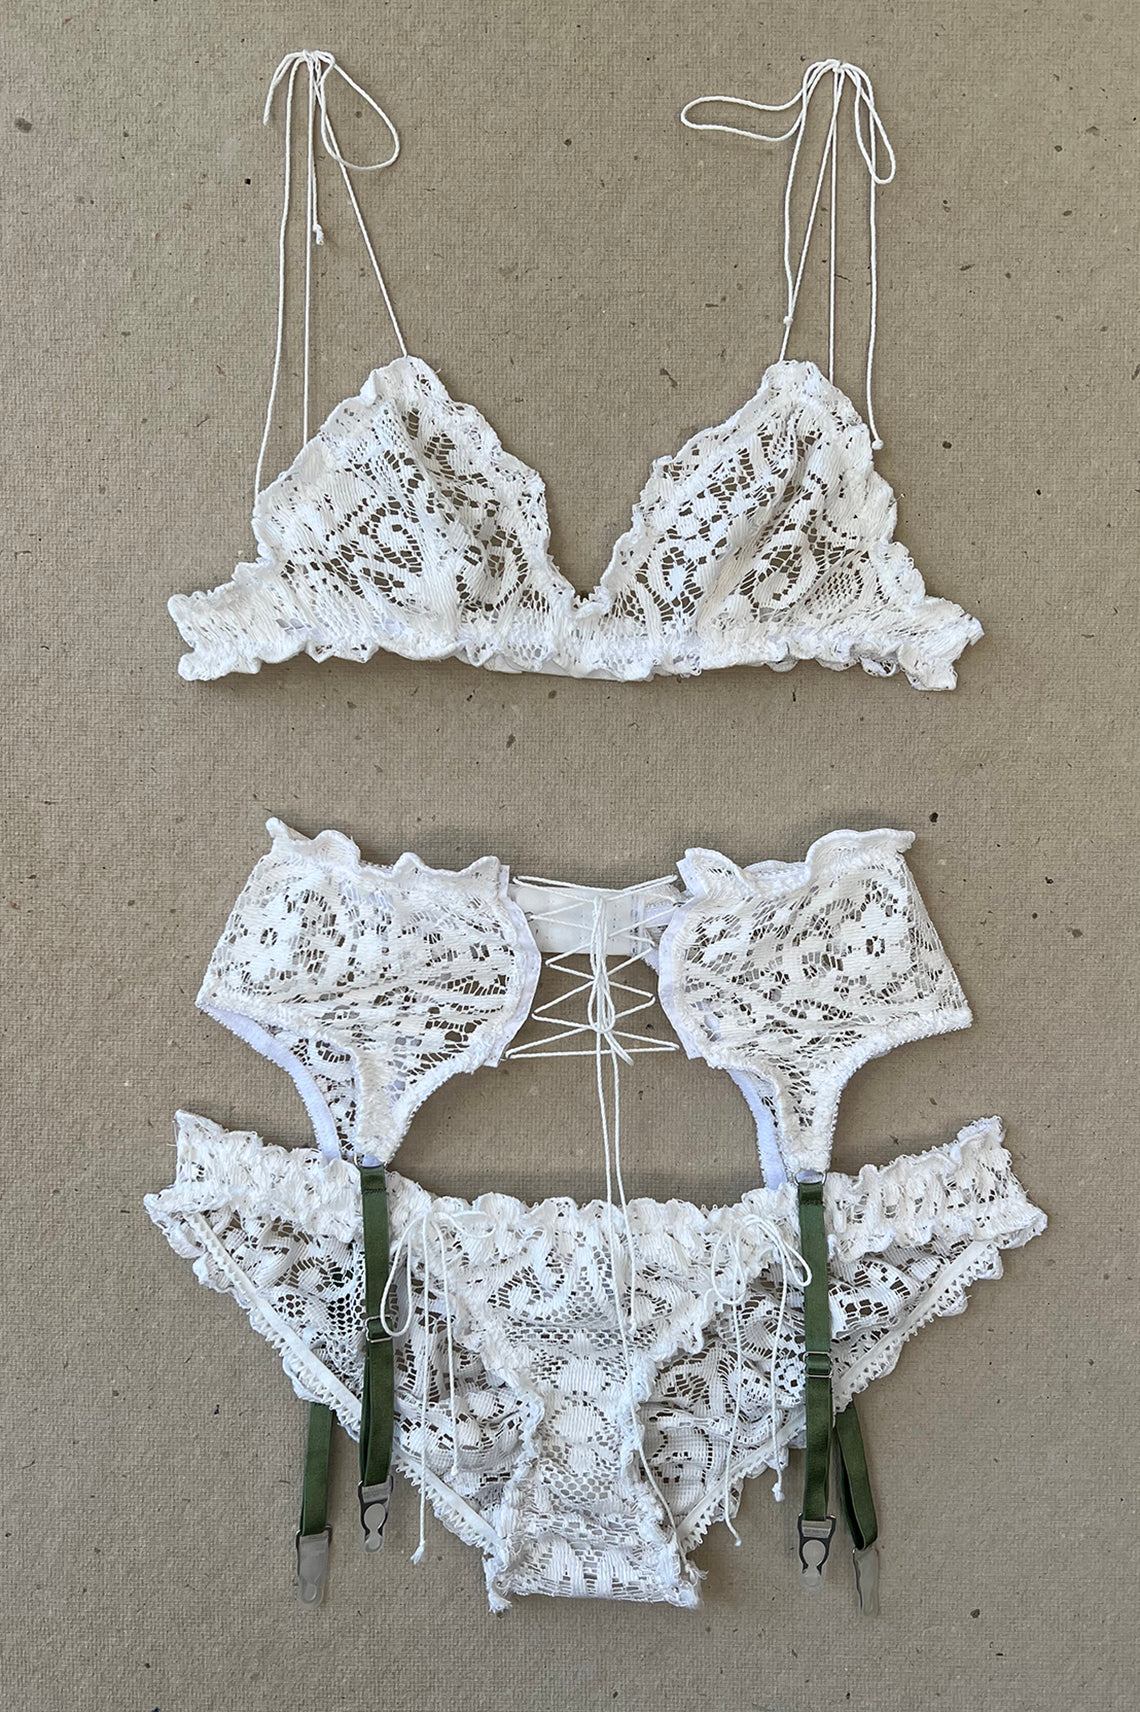 Anaphora Bloomer Panty in Upcycled Vintage Crochet Lace